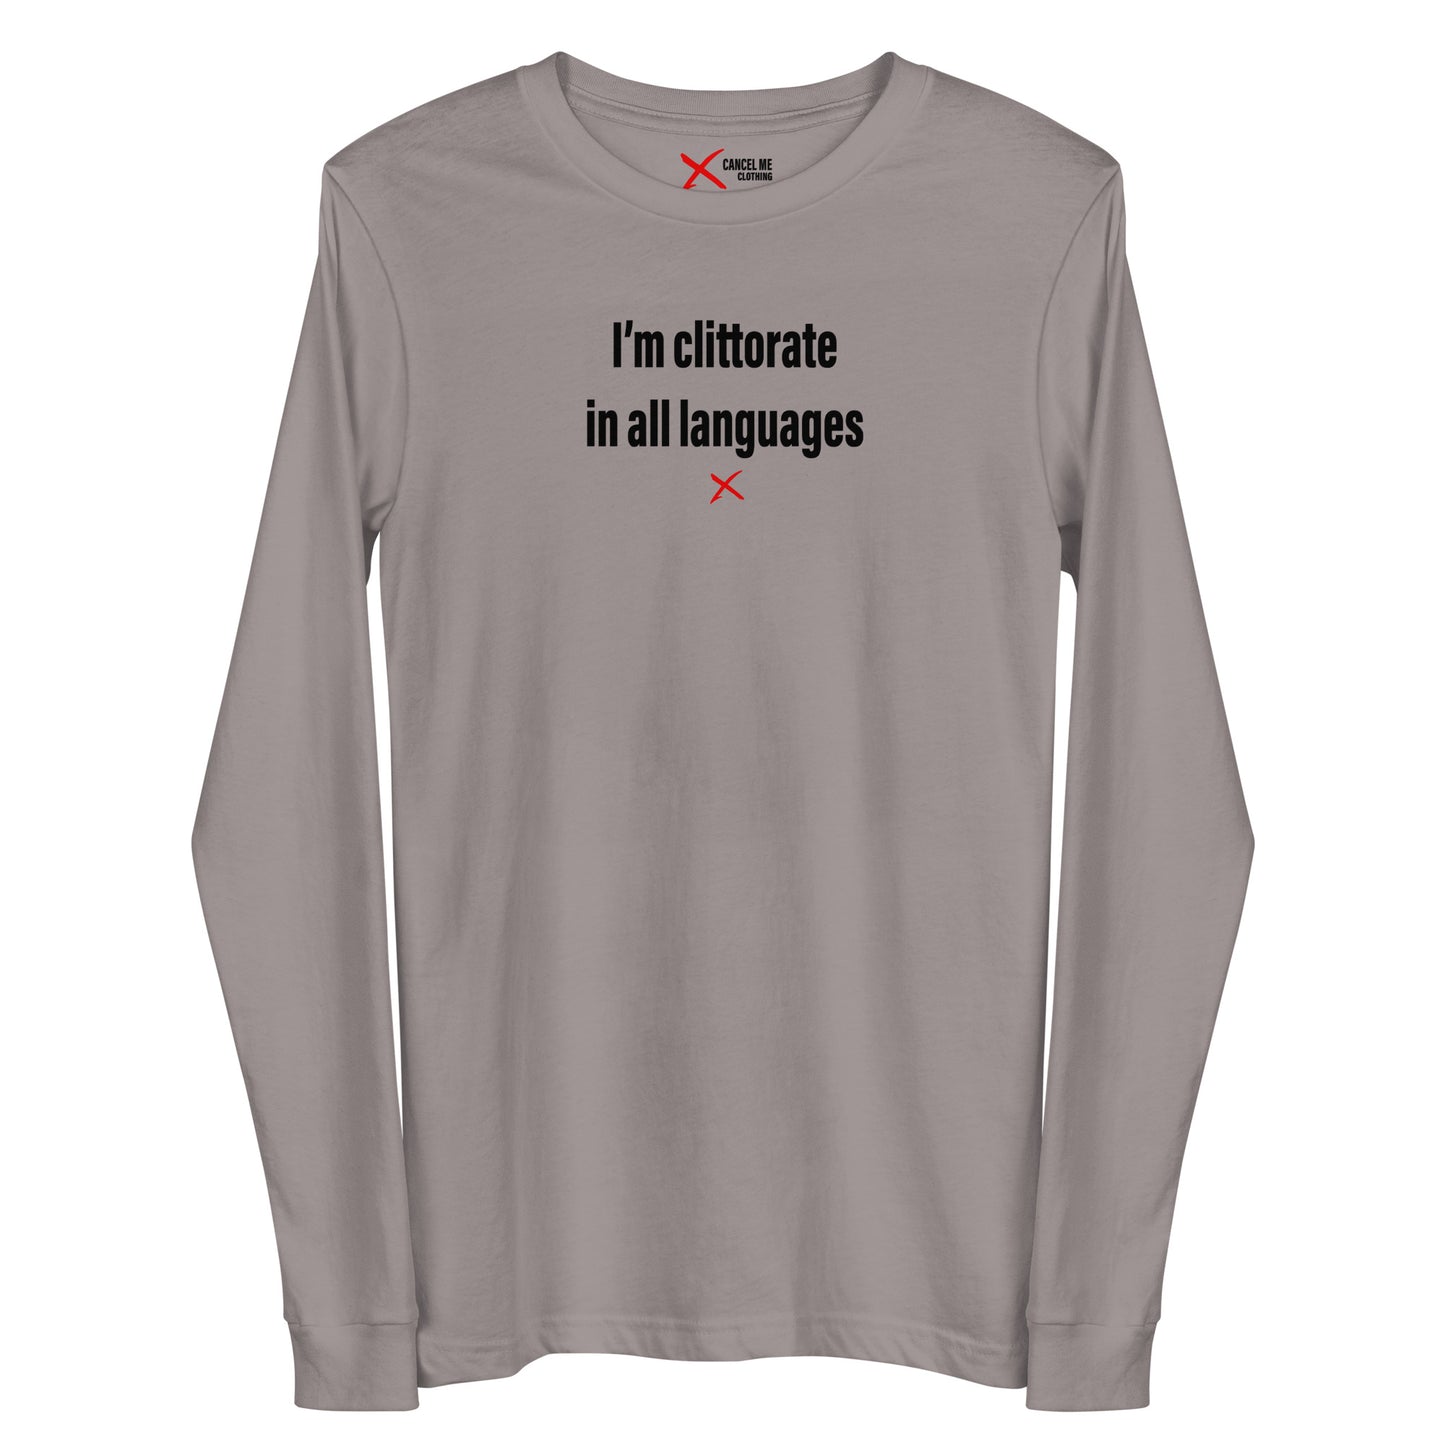 I'm clittorate in all languages - Longsleeve